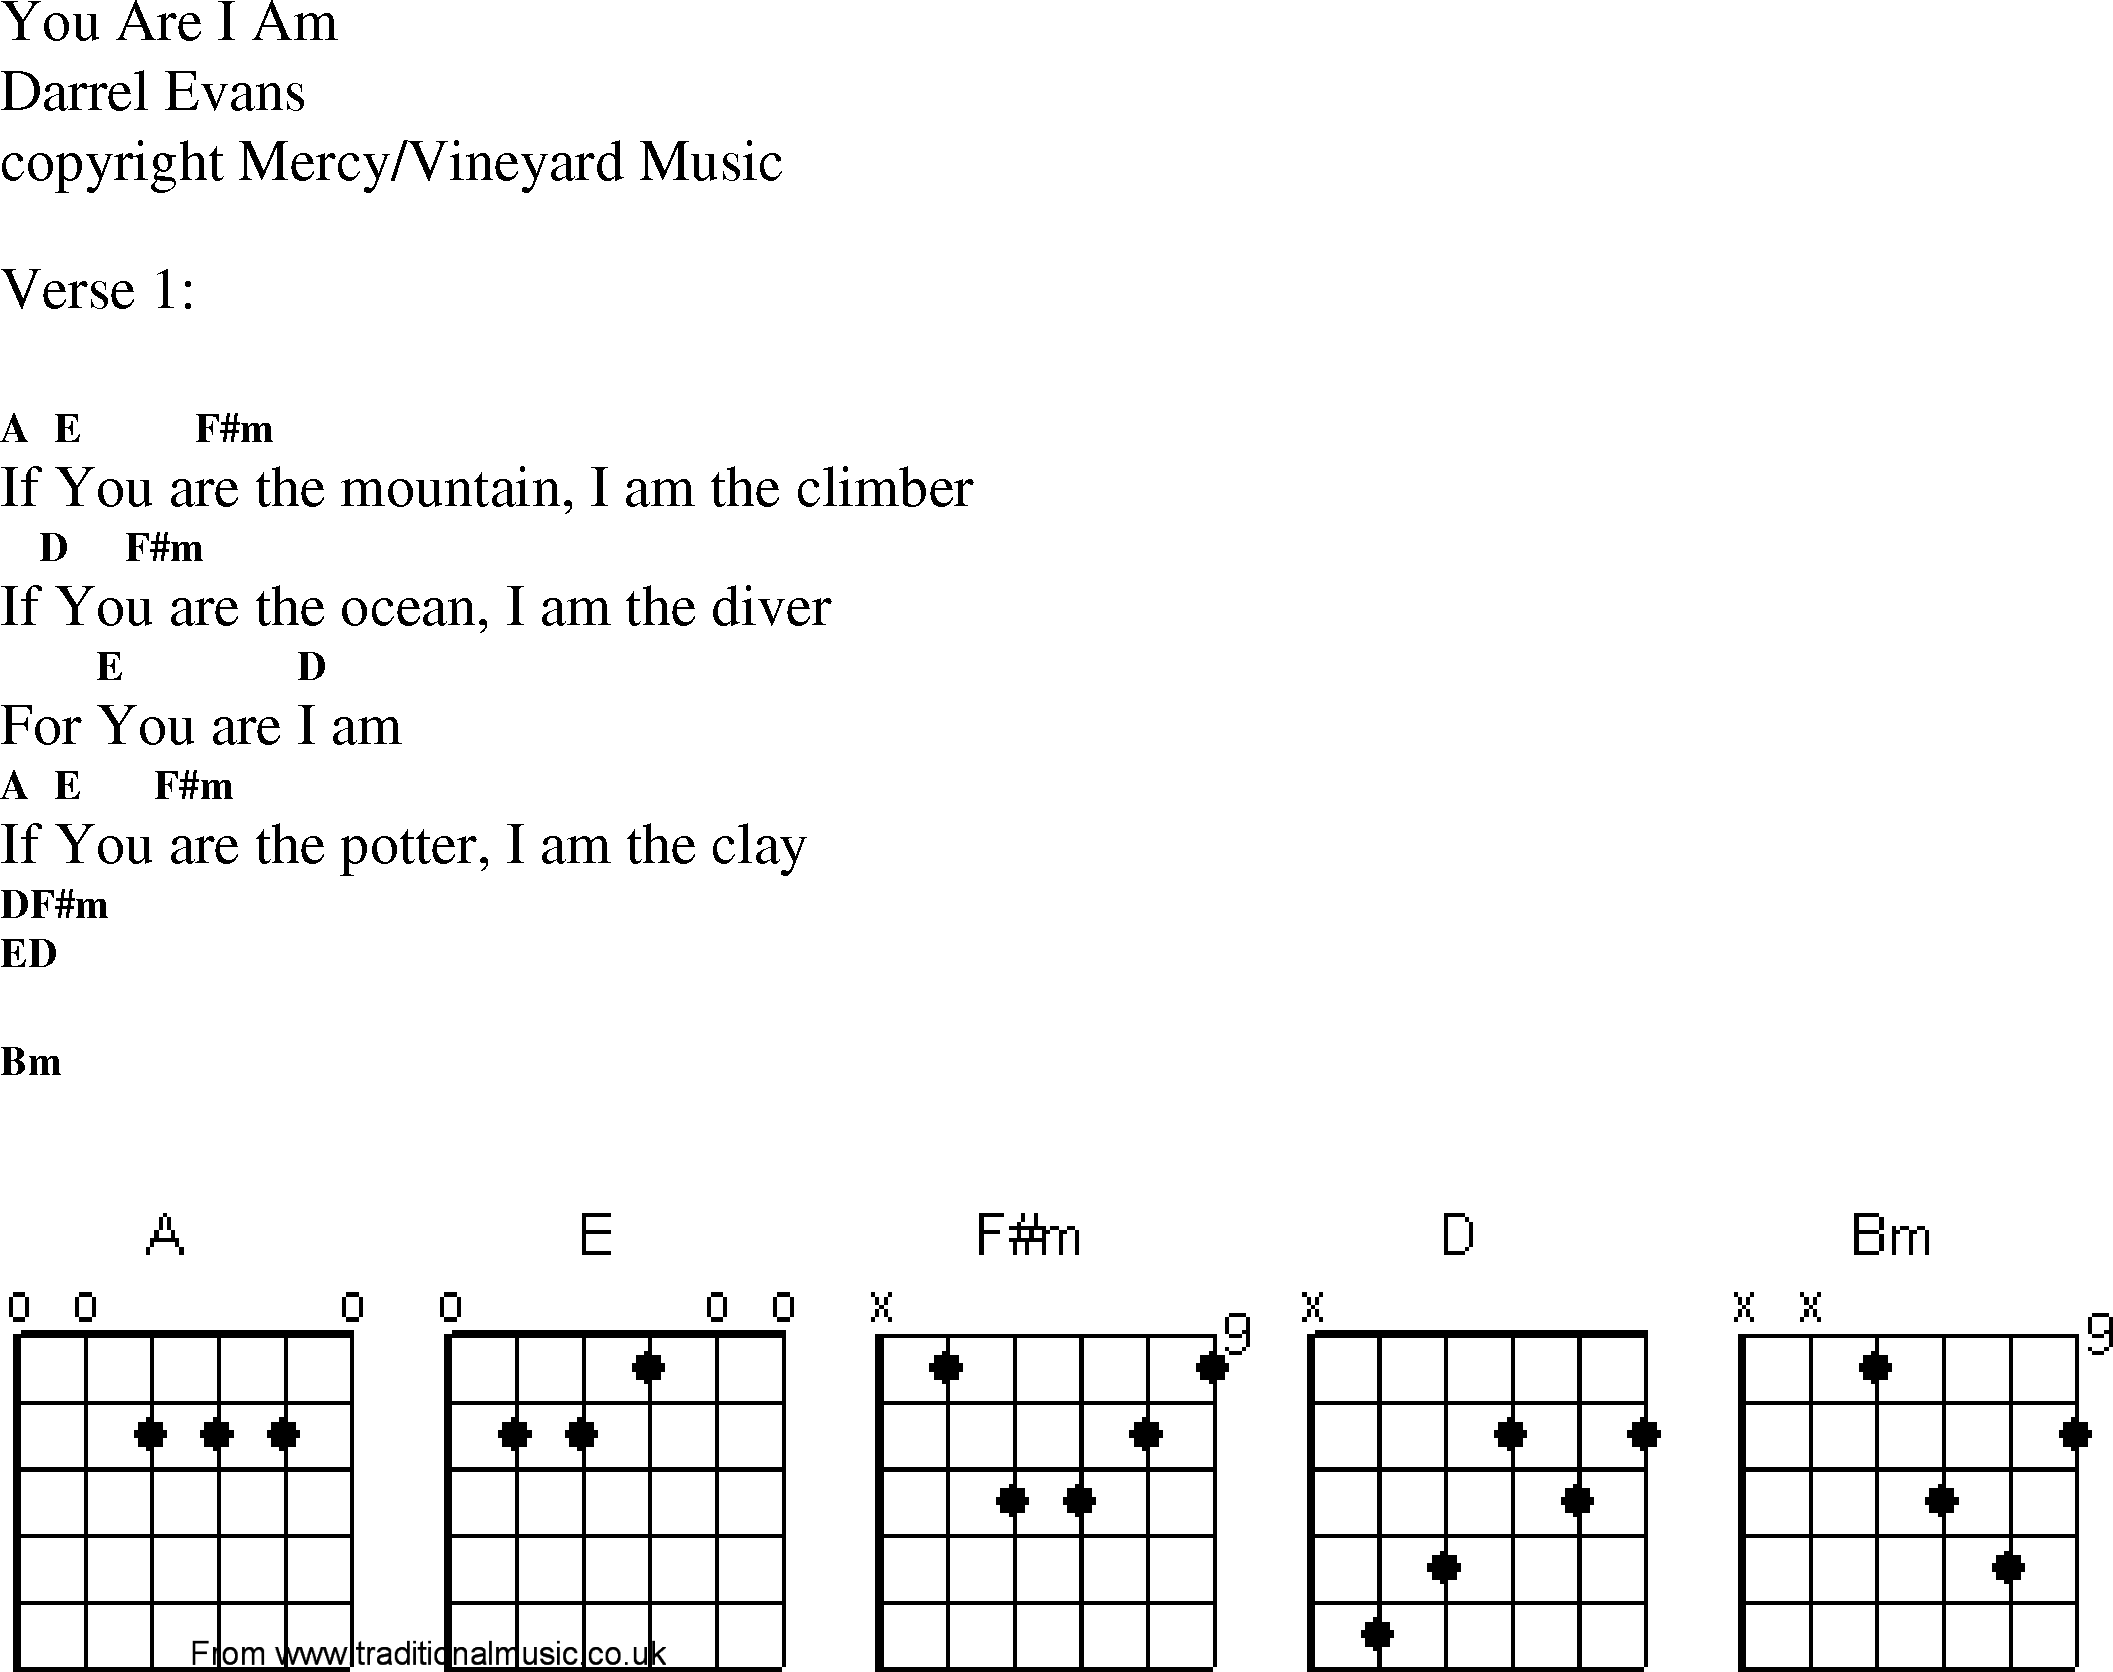 Gospel Song: you_are_i_am, lyrics and chords.